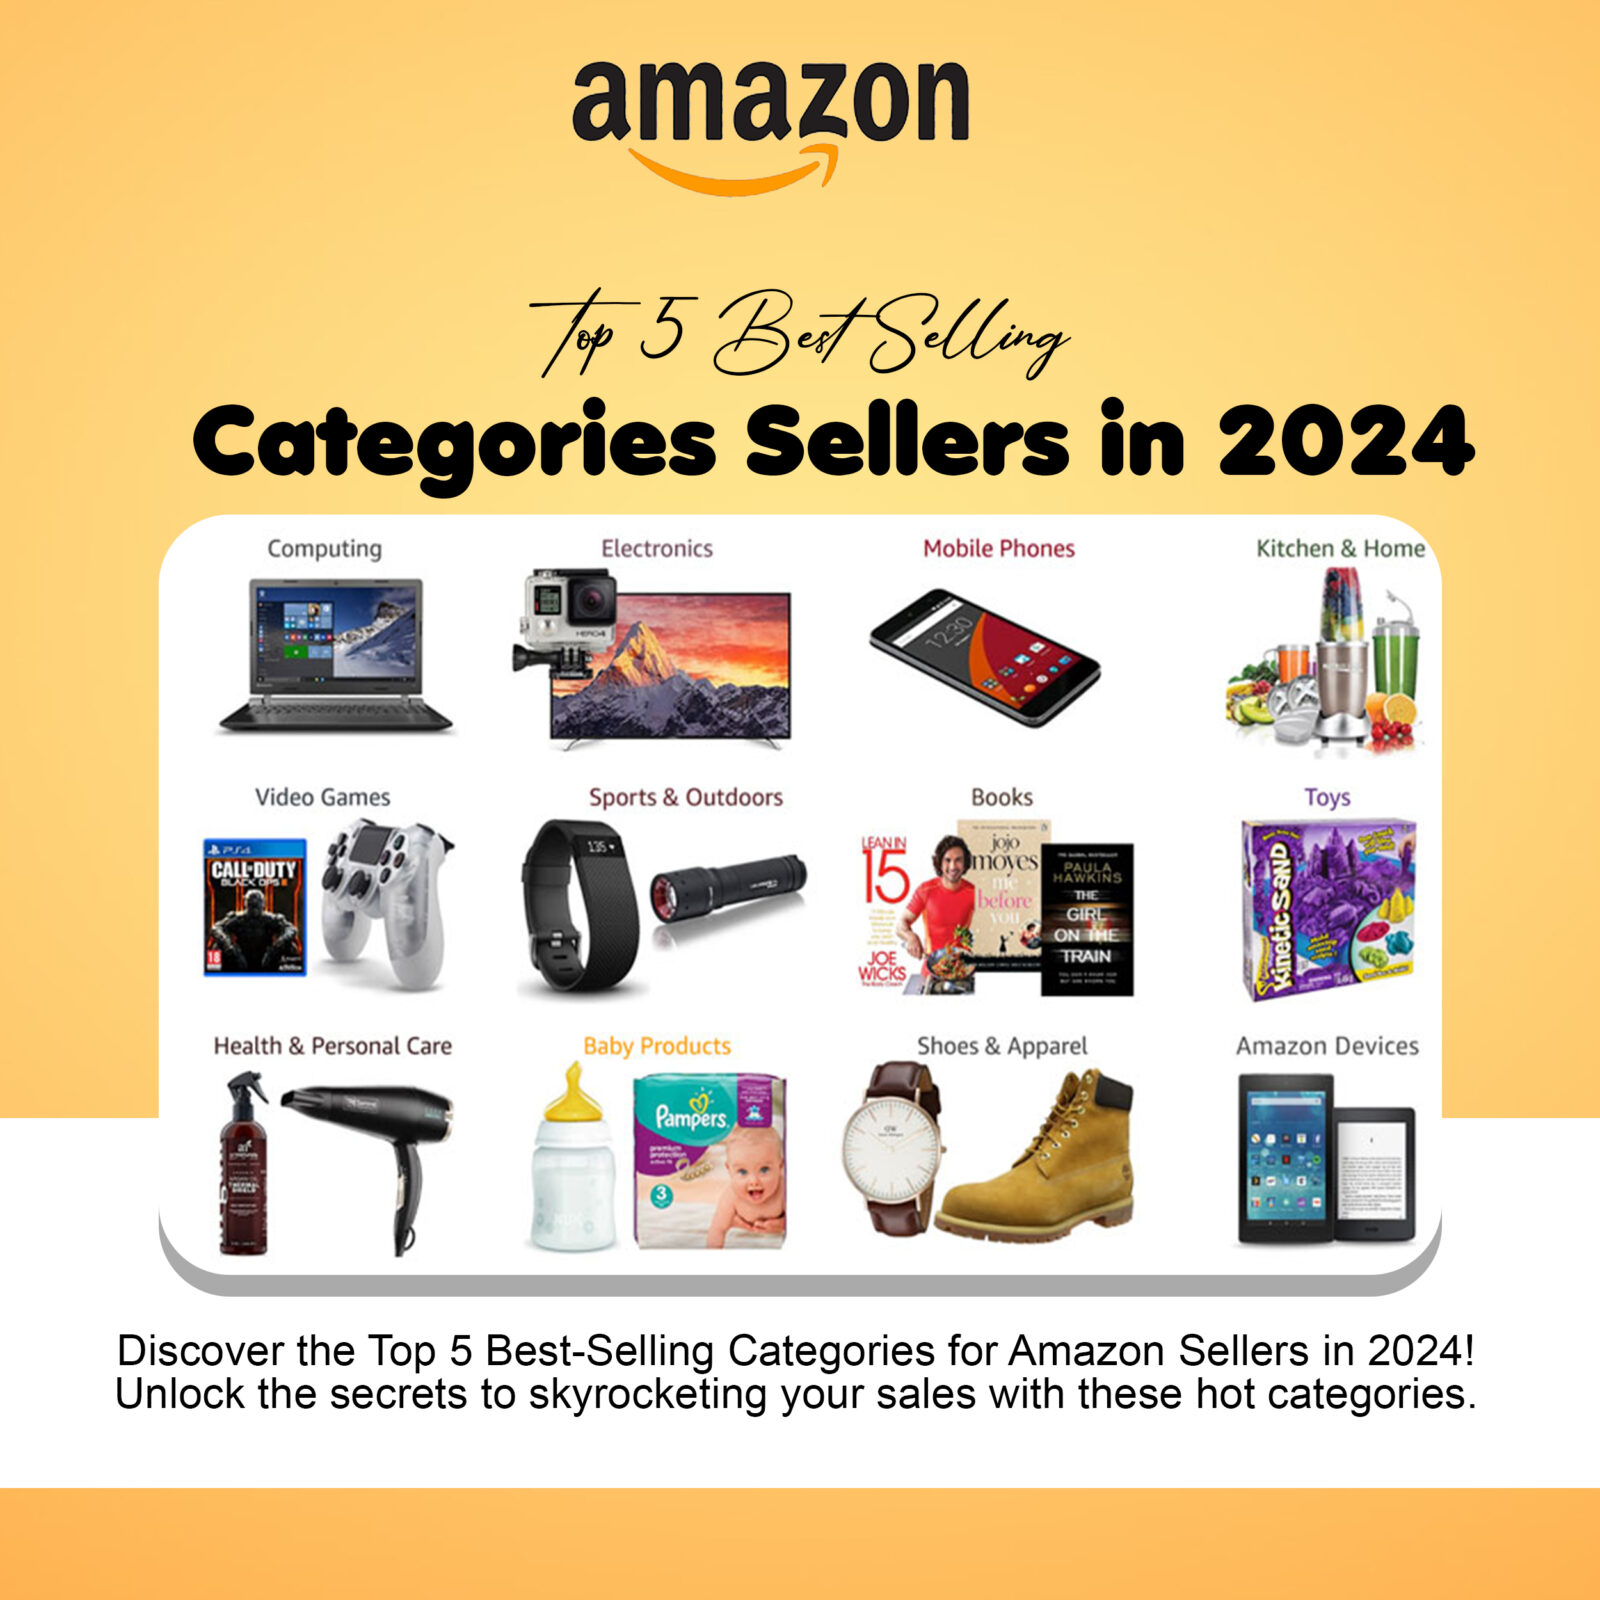 Top 5 Best Selling Categories for Amazon Sellers in 2024